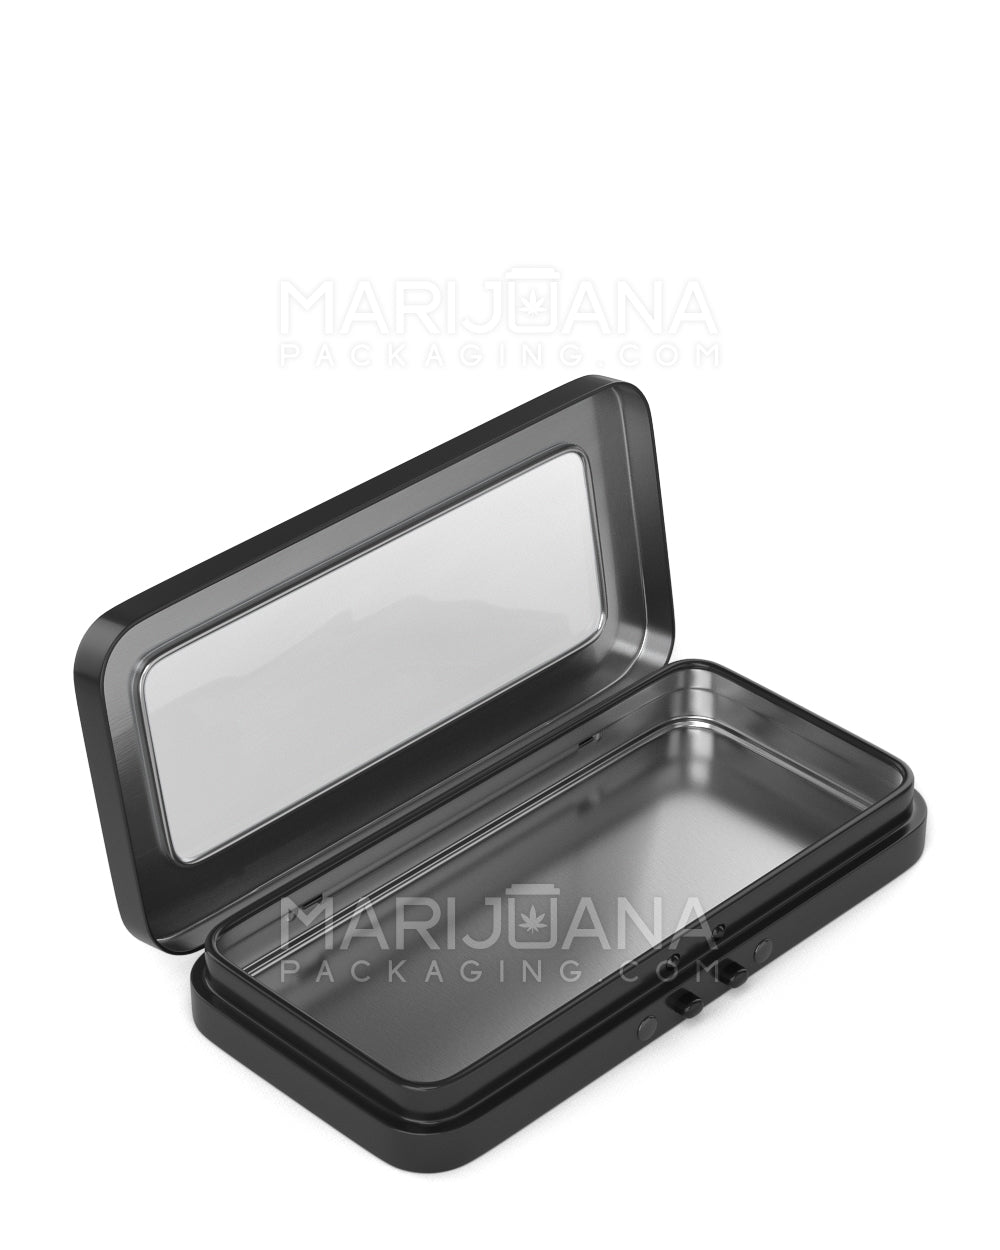 Child Resistant & Sustainable | Hinged-Lid Large Vista Edible & Joint Box w/ See-Through Window |  Black Tin  - 1